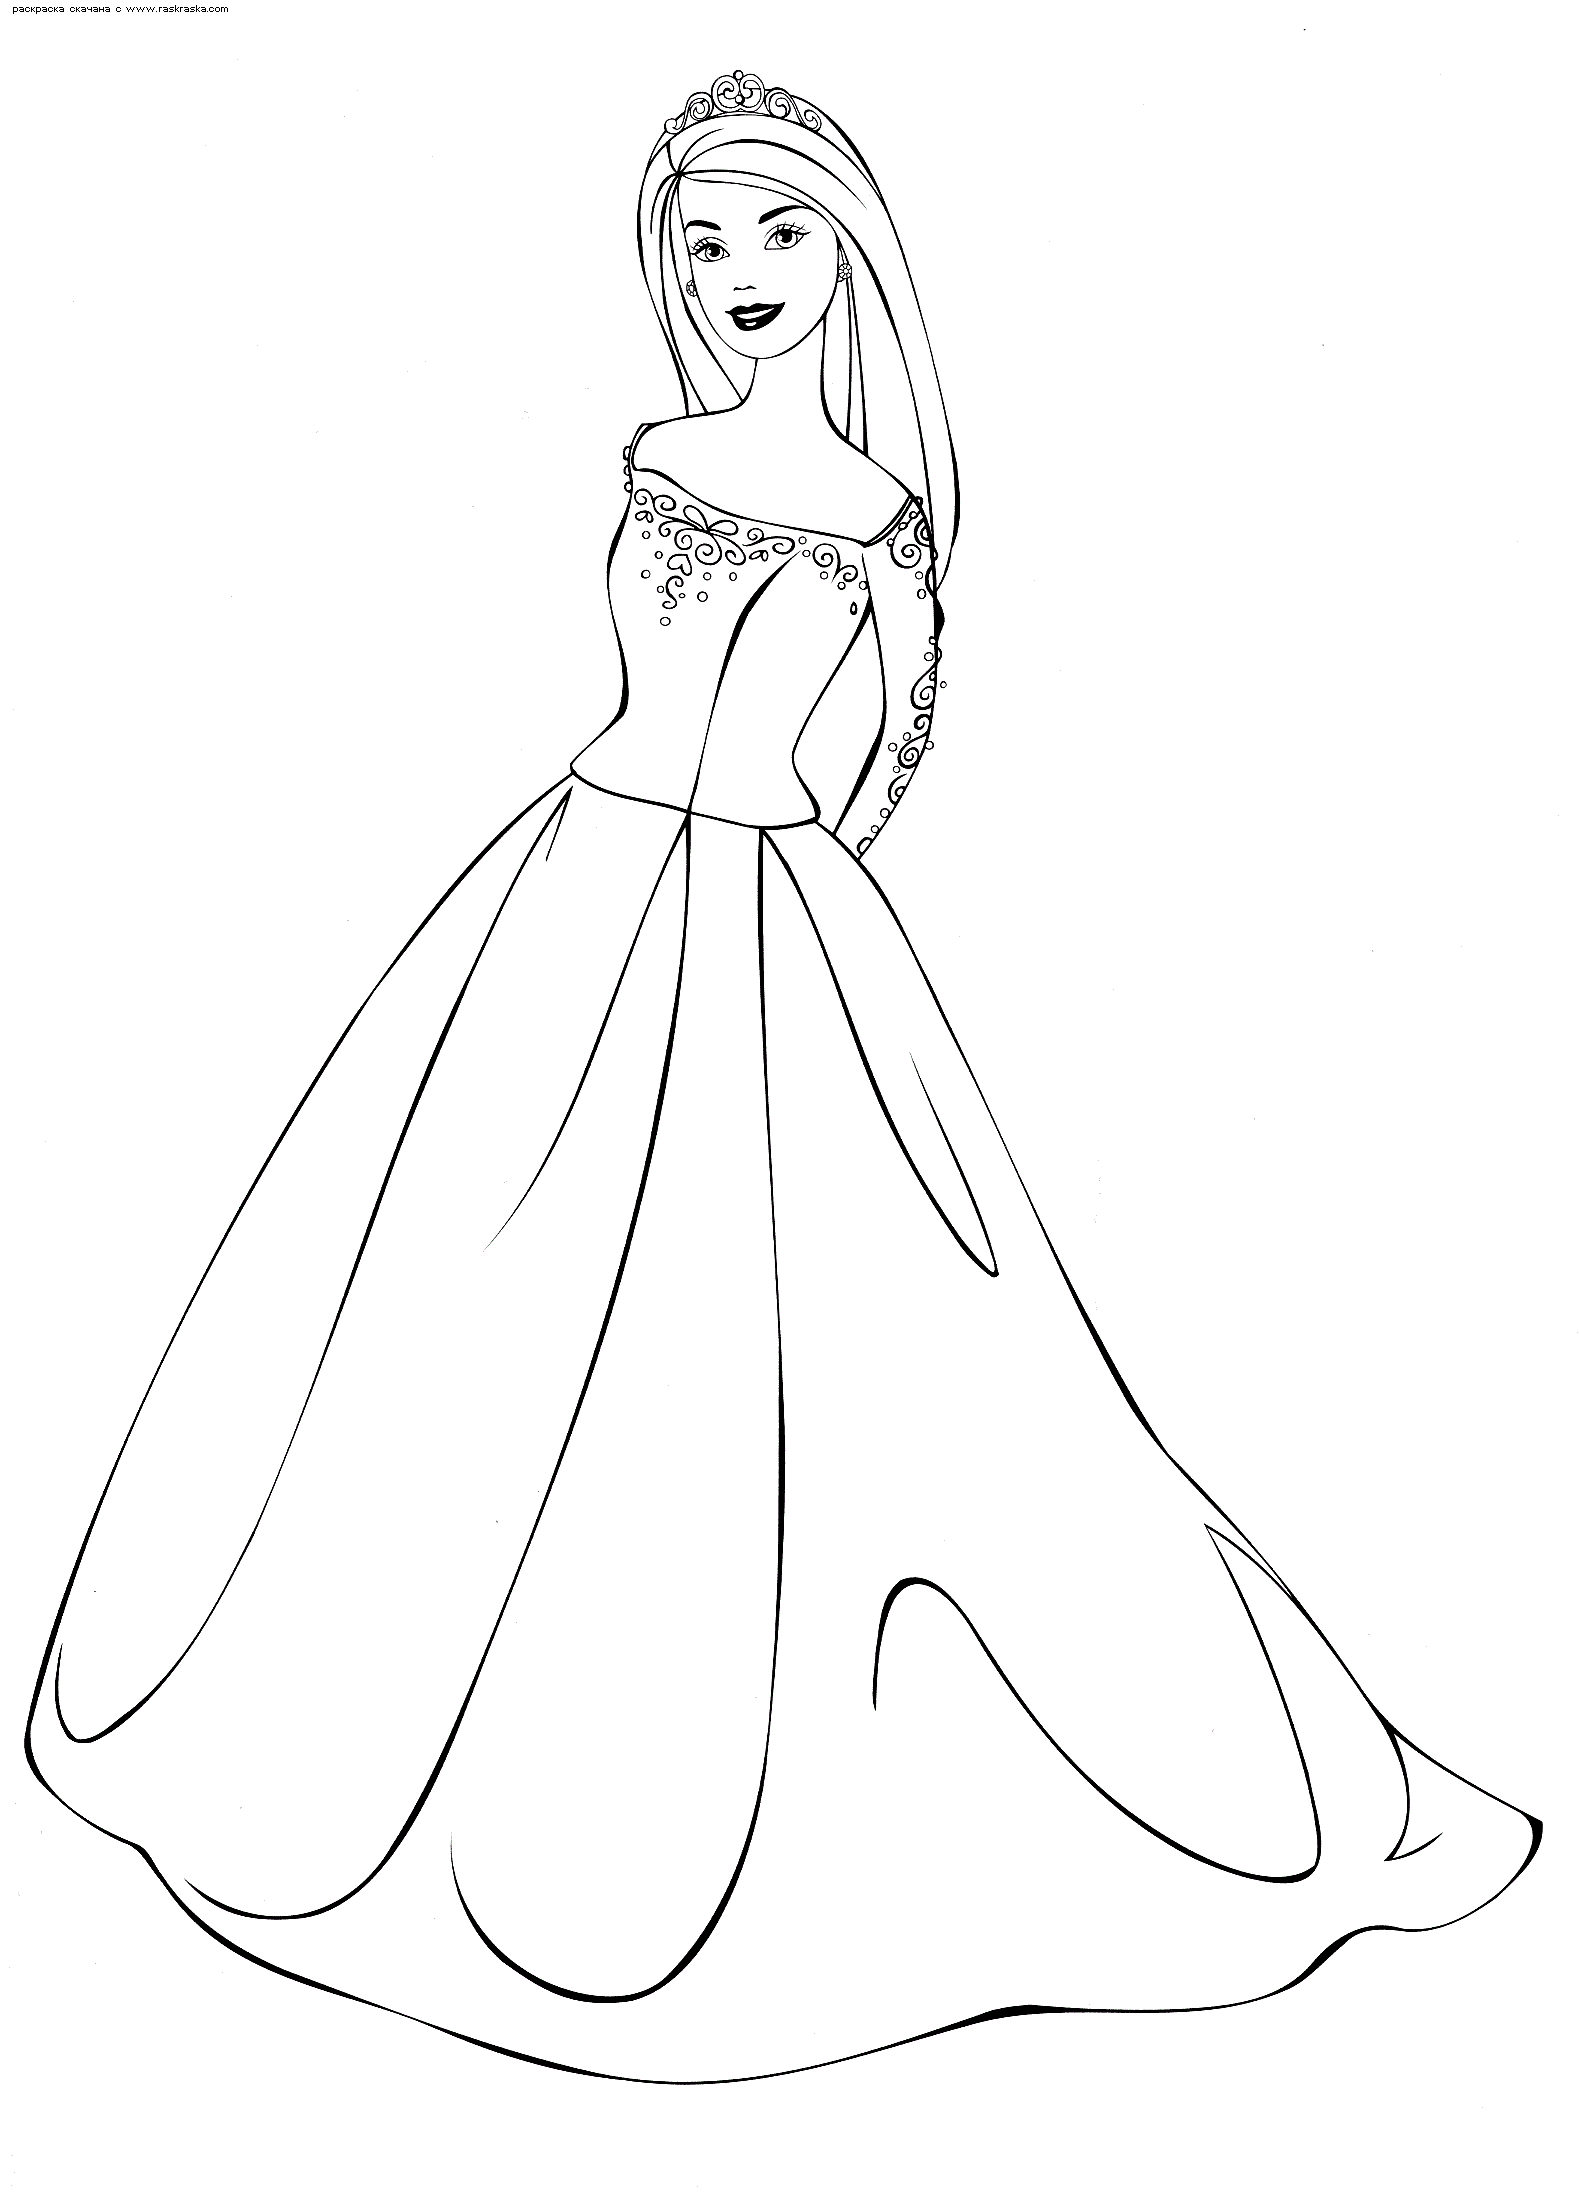 Barbie coloring pages to print for free; mermaid, princess